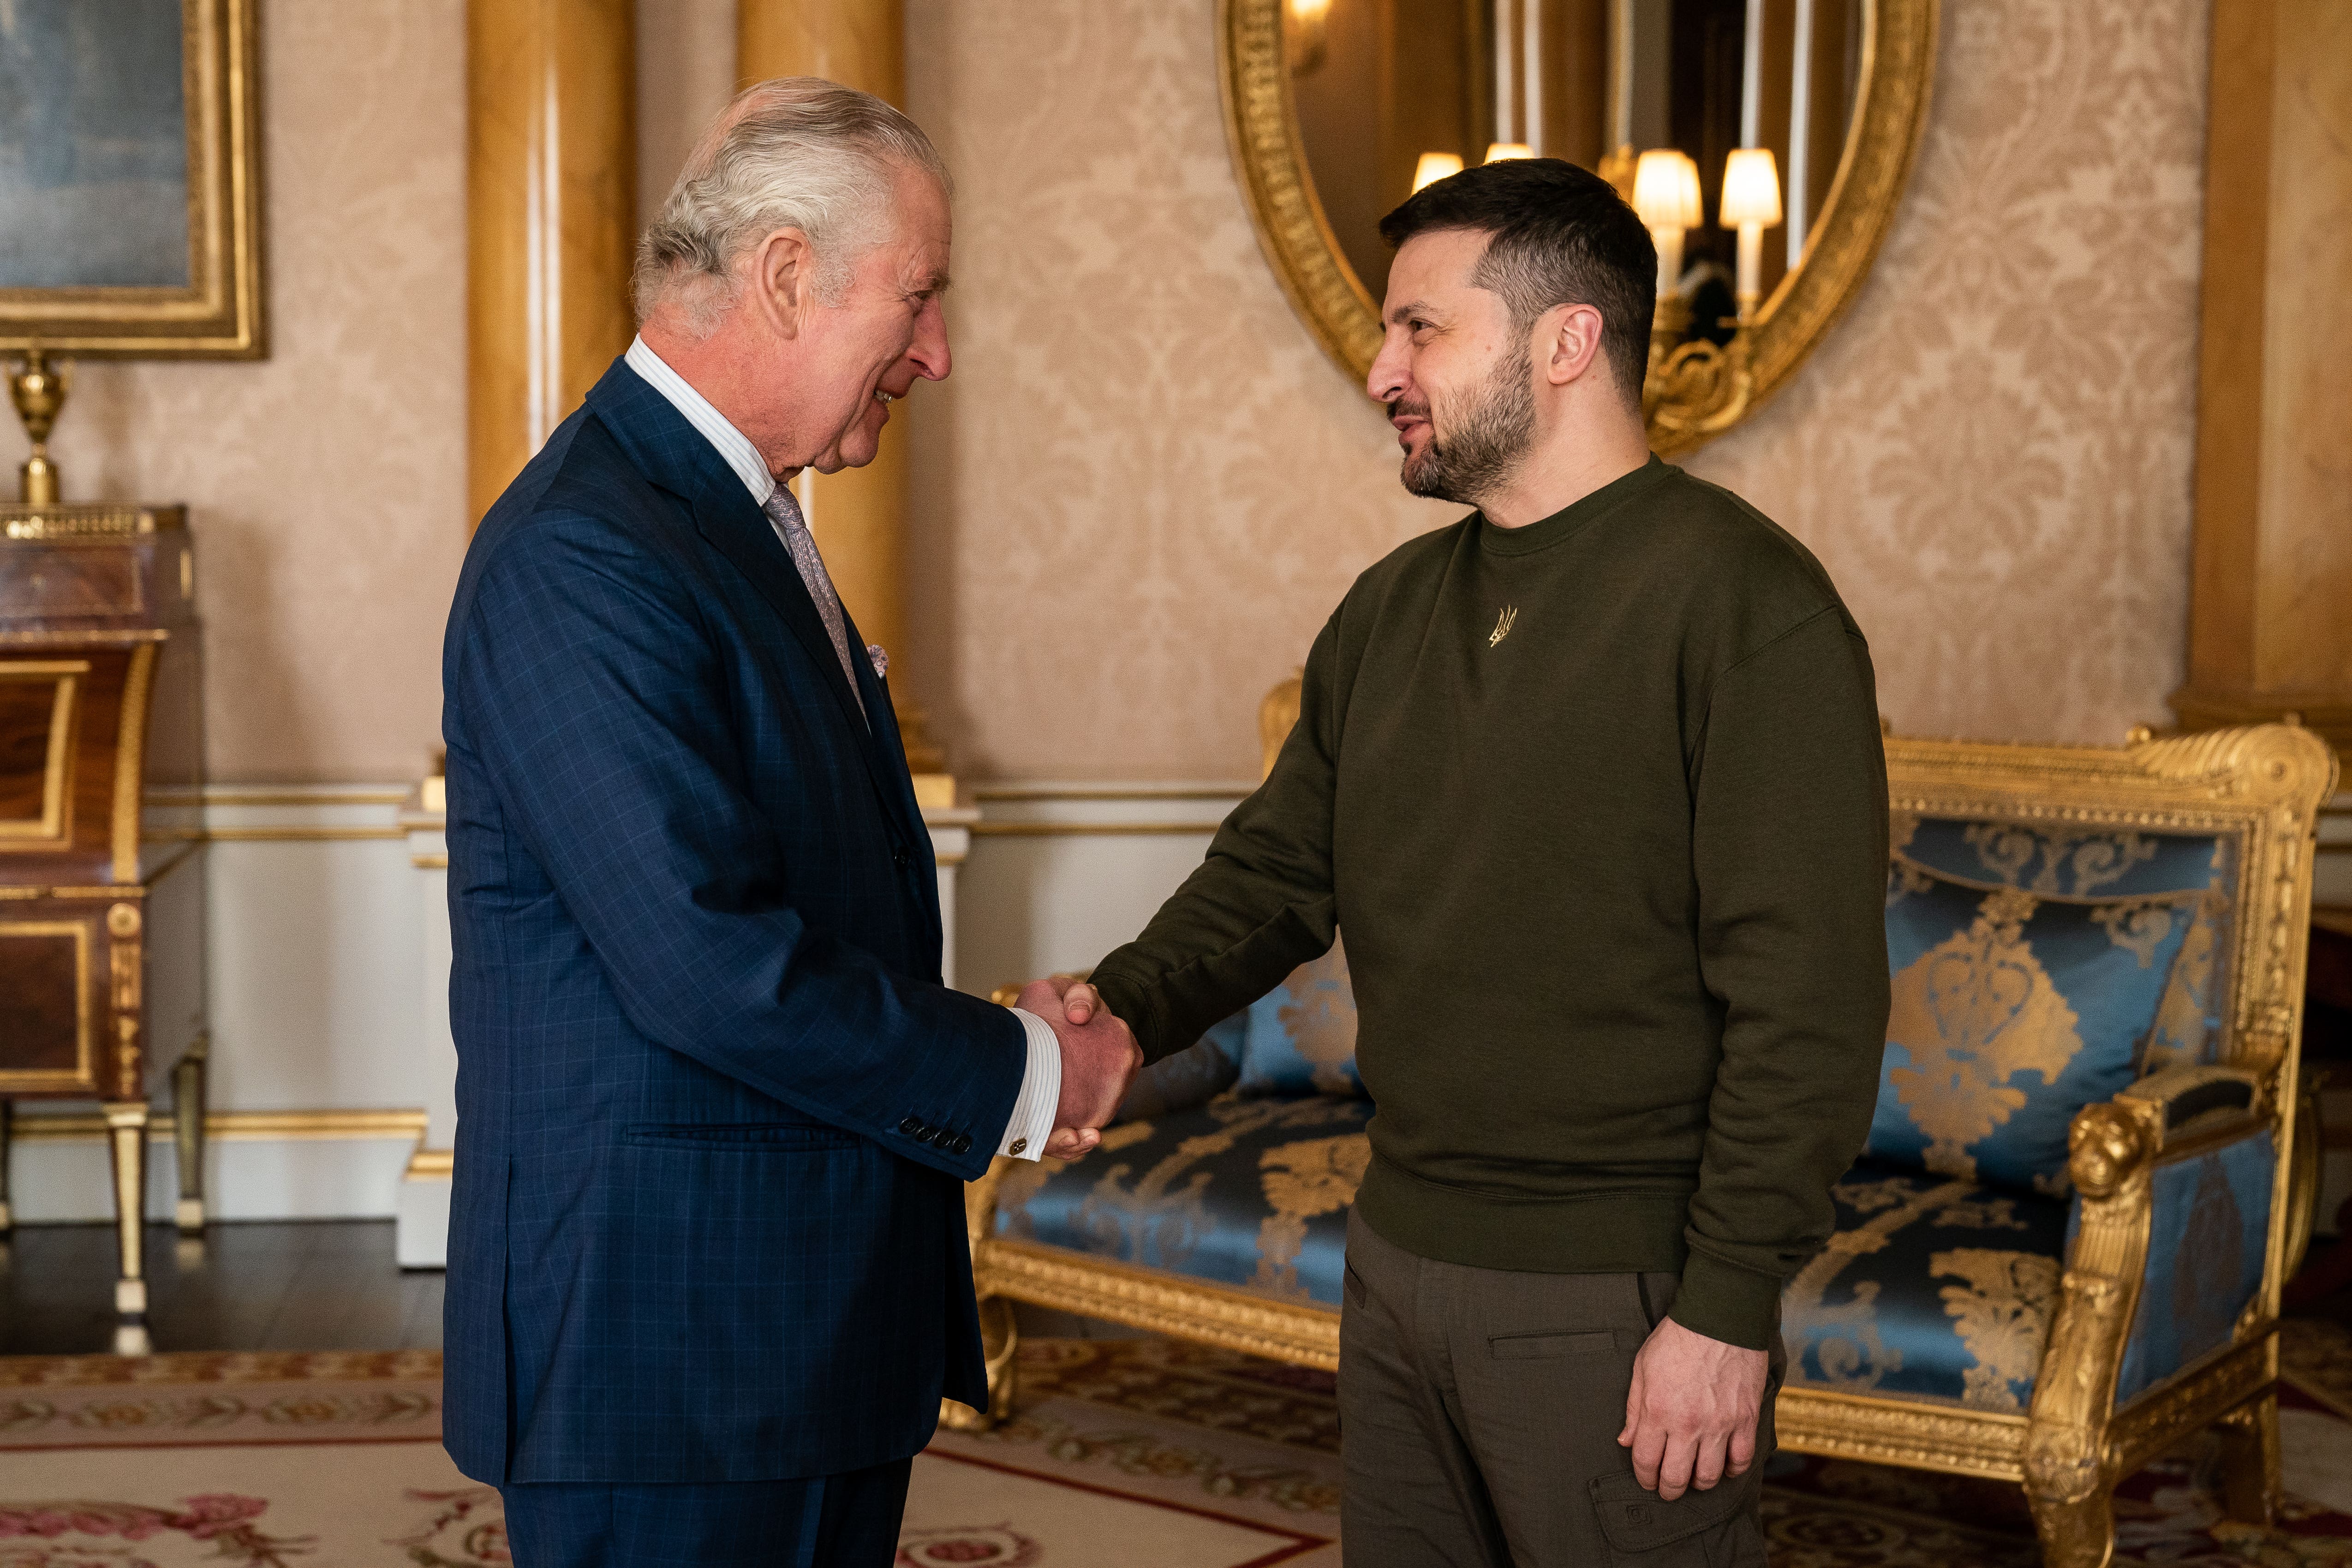 Charles has met with President Zelensky several times since the Russian invasion of Ukraine